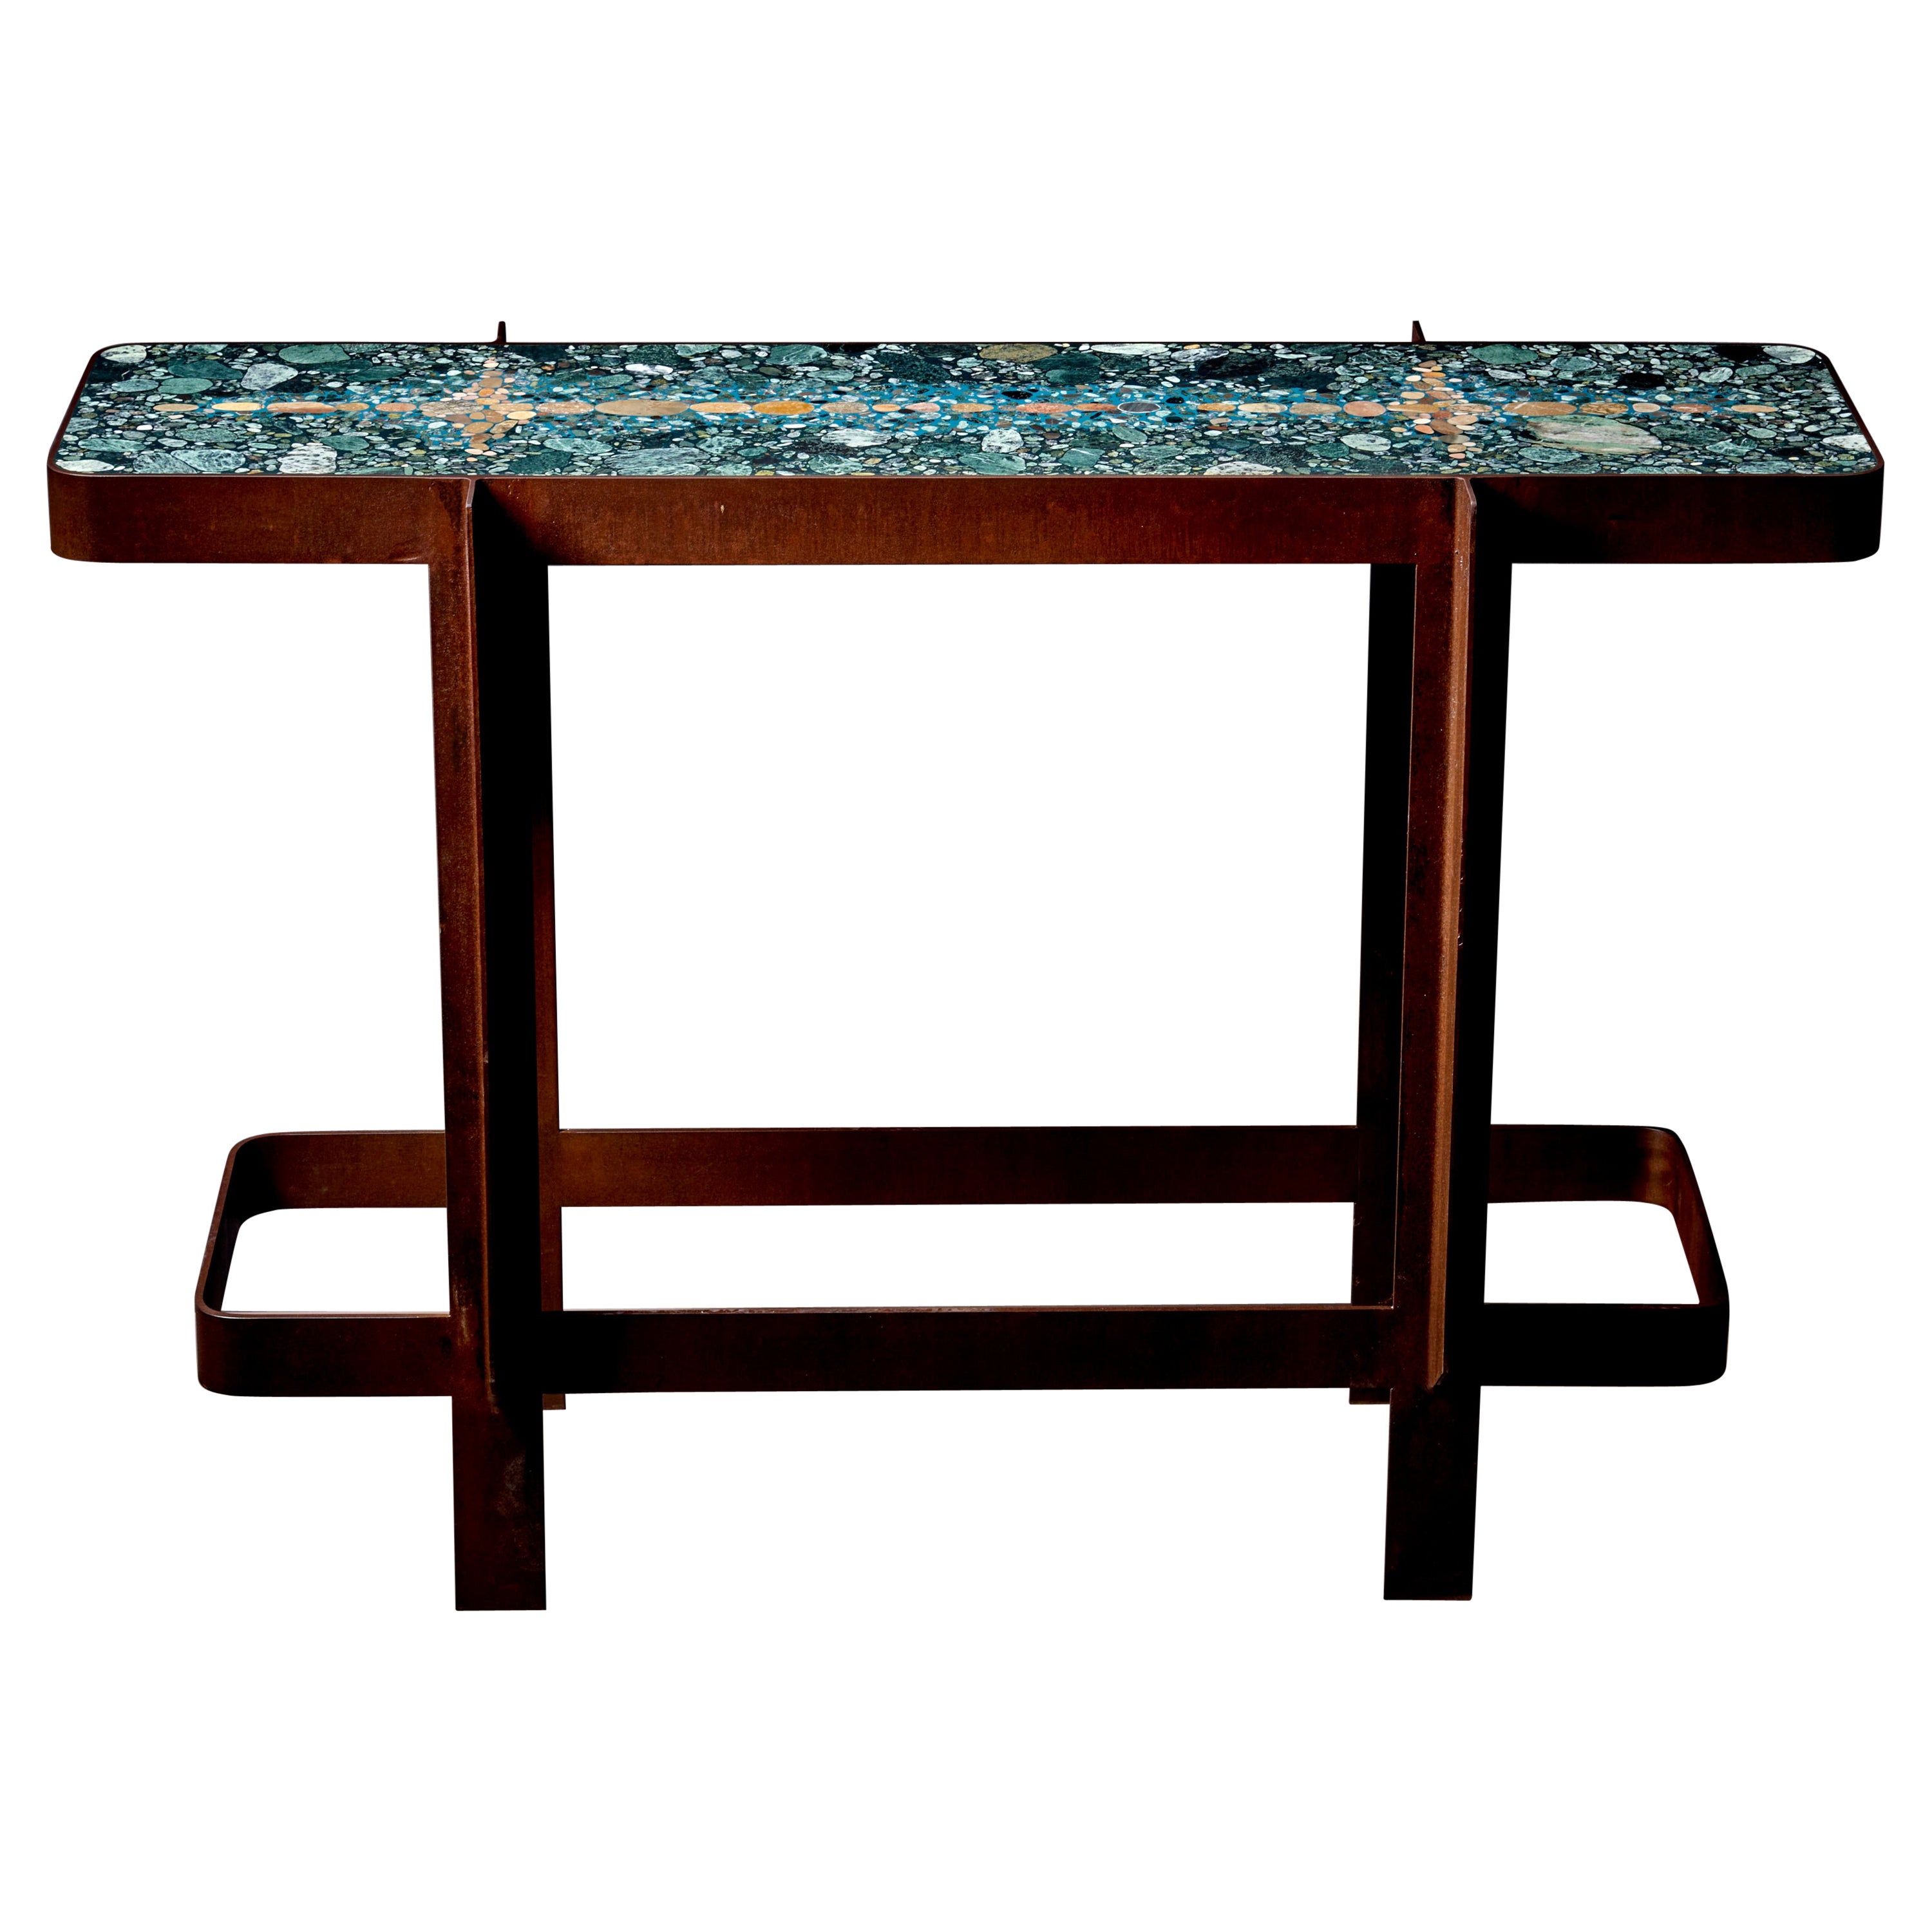 Handcrafted Felix Muhrhofer Terrazzo Bar Counter 'Admiral Hertha' For Sale